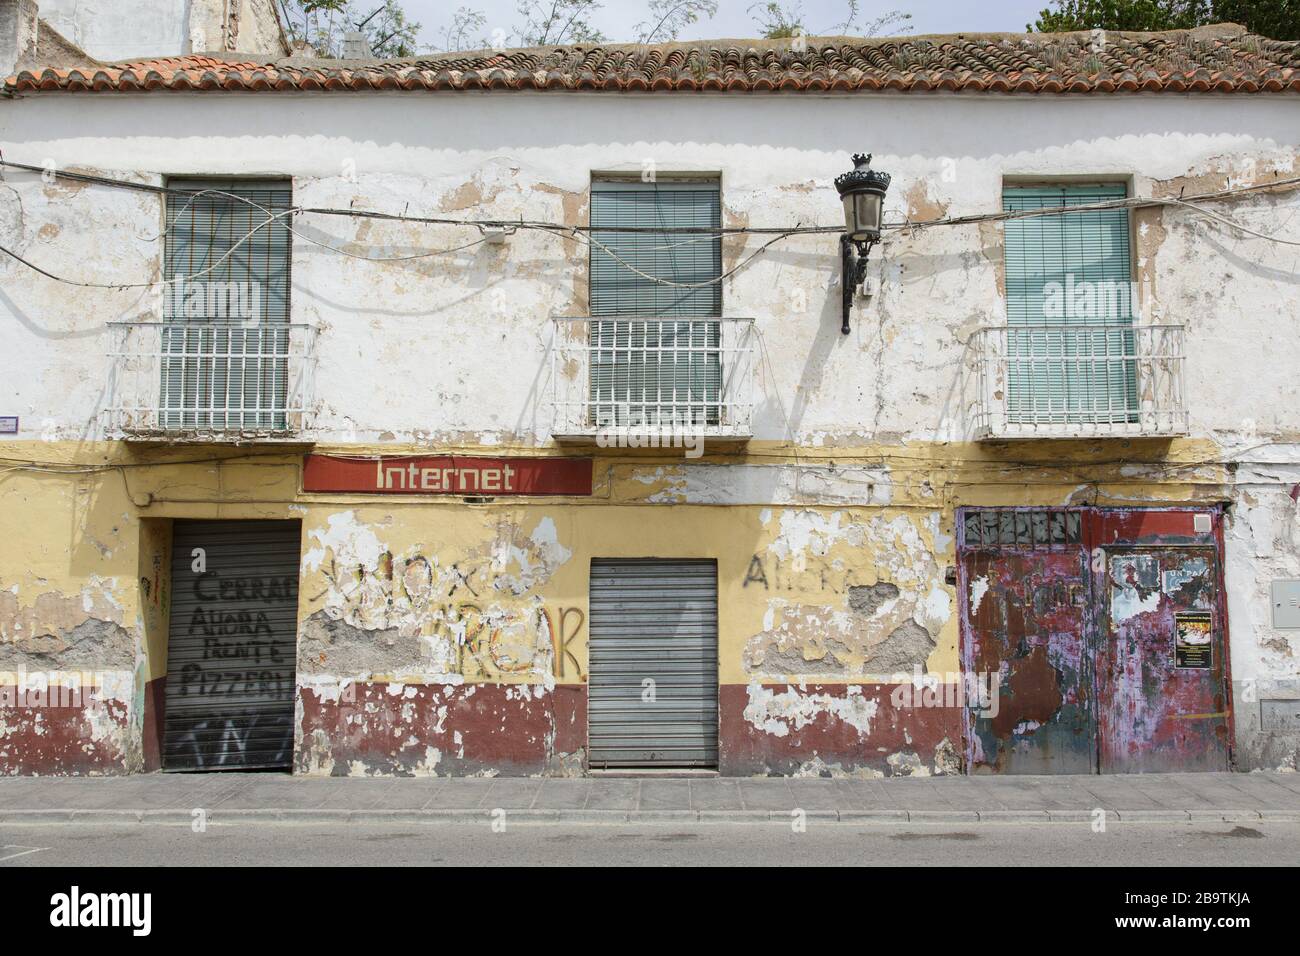 A distressed flaky facade with the word 'Internet' painted on a closed-up building on a street in Órgiva, Andalucia, Spain Stock Photo